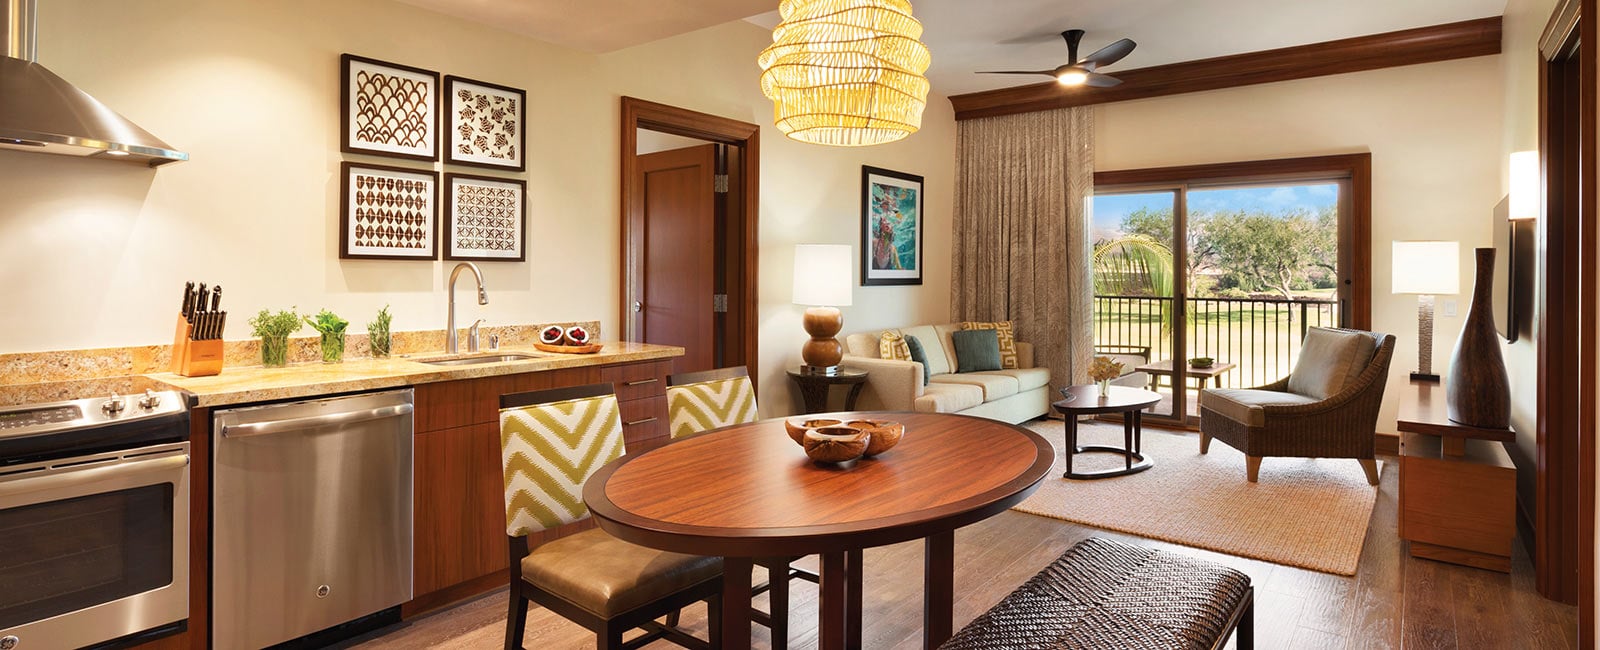 Kitchen and Dining Area at Kings' Land Resort in Waikoloa, Hawaii